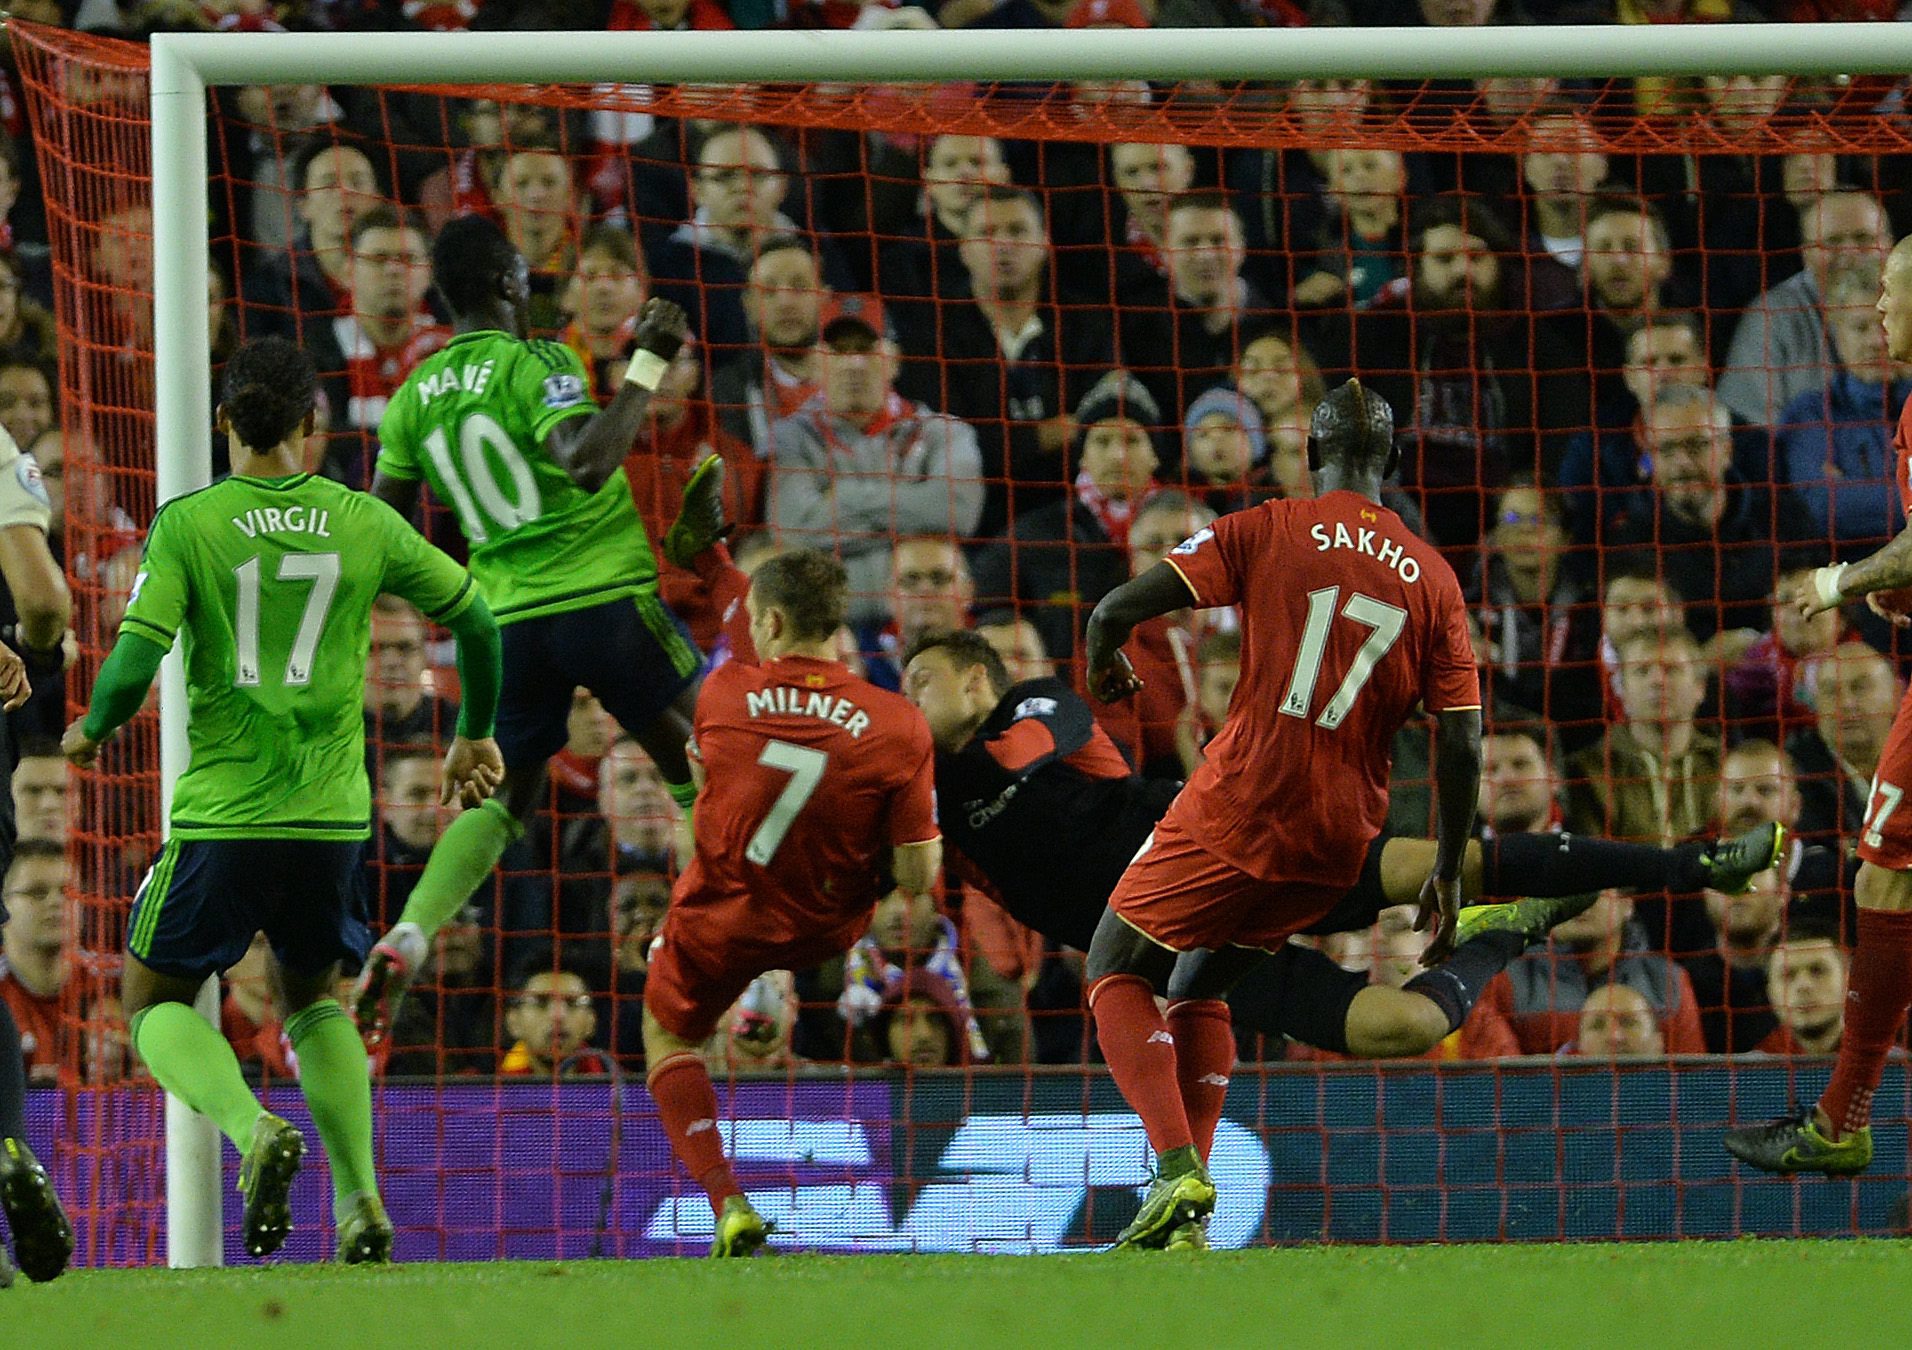 Sadio Mane (No 10 in picture) was lively enough to earn Southampton the draw